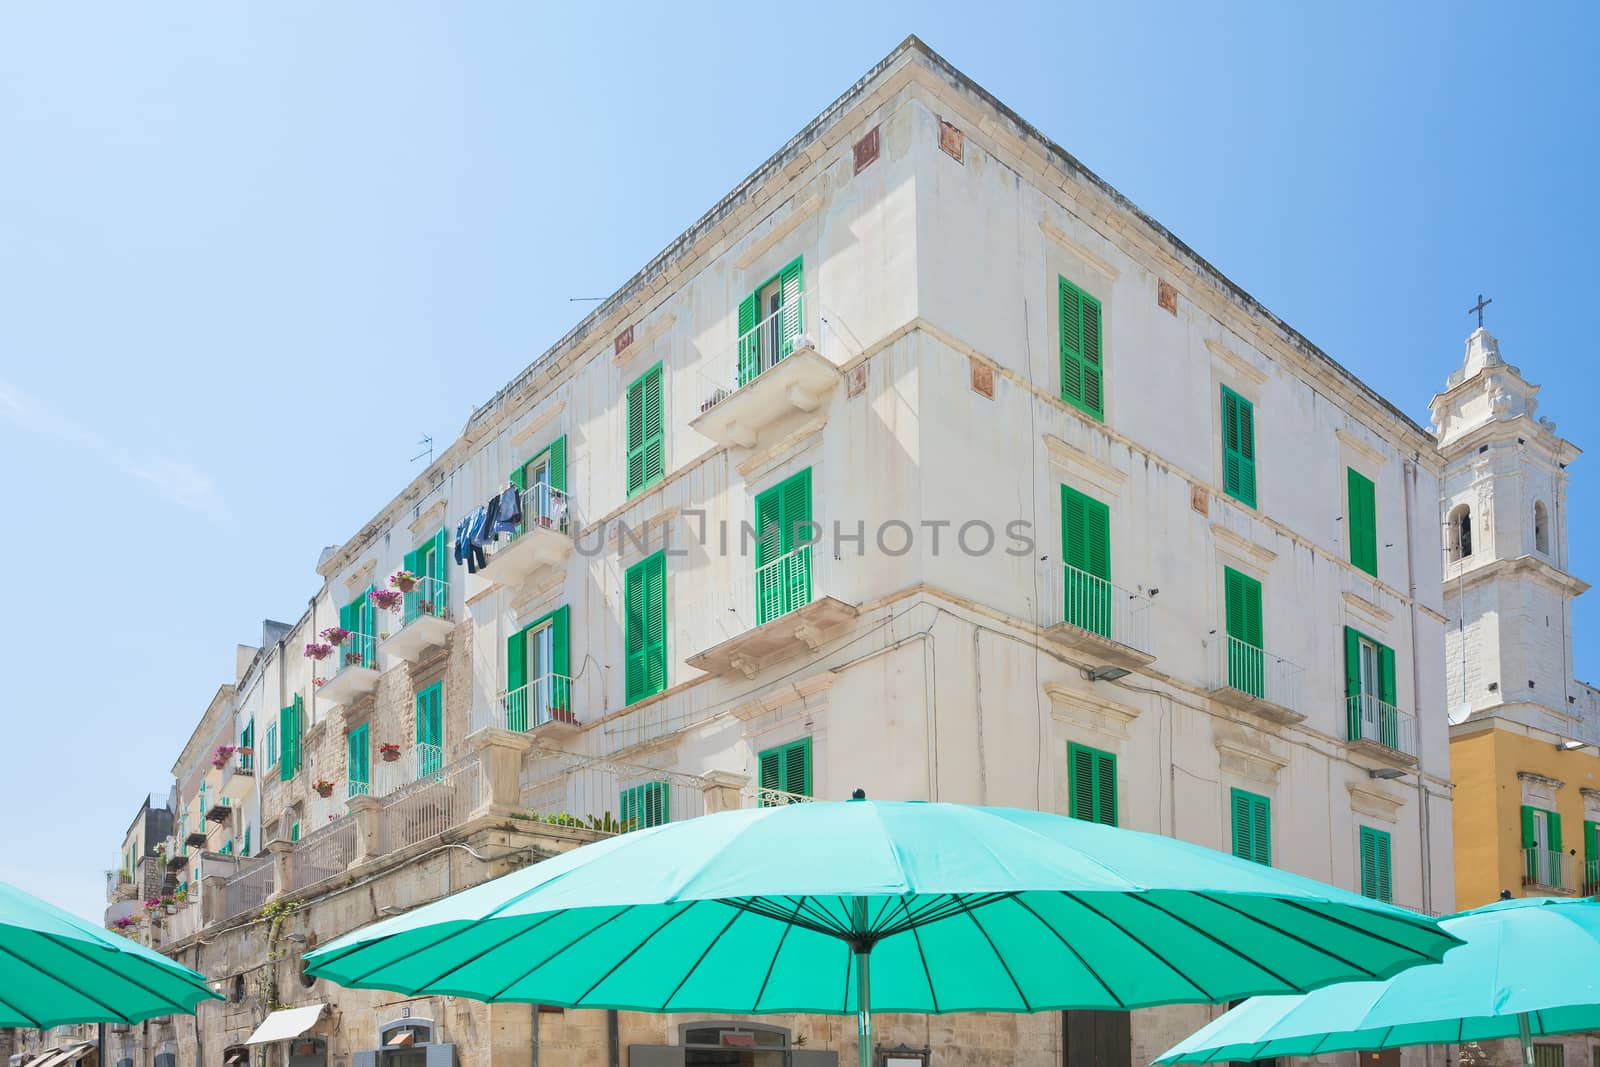 Molfetta, Apulia - Turquoise sunshades and lattice blinds in the by tagstiles.com